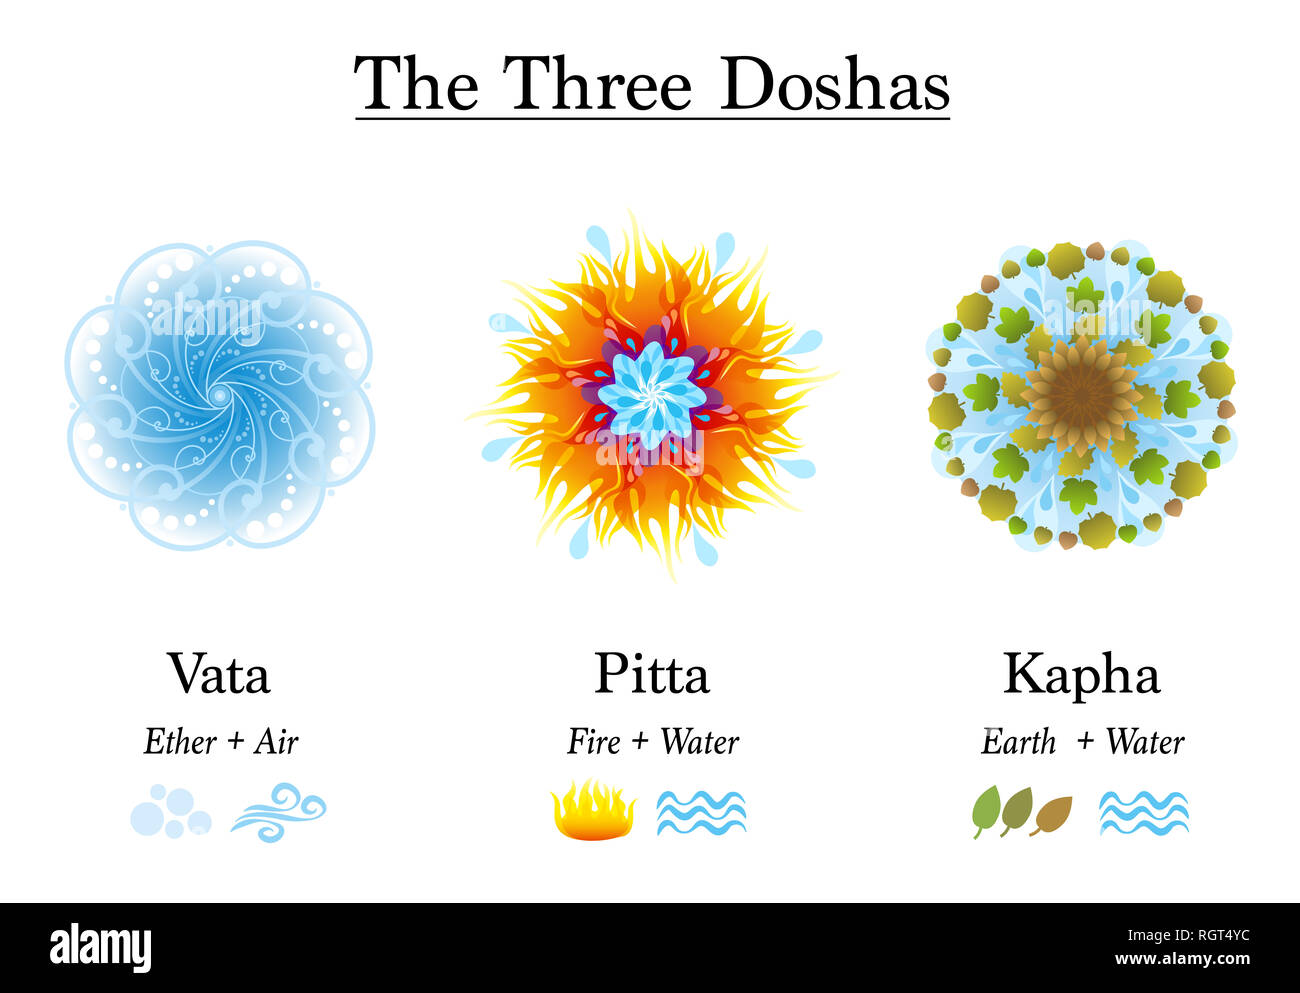 Three Doshas, Vata, Pitta, Kapha - Ayurvedic symbols of body constitution types, designed with the elements ether, air, fire, water and earth. Stock Photo